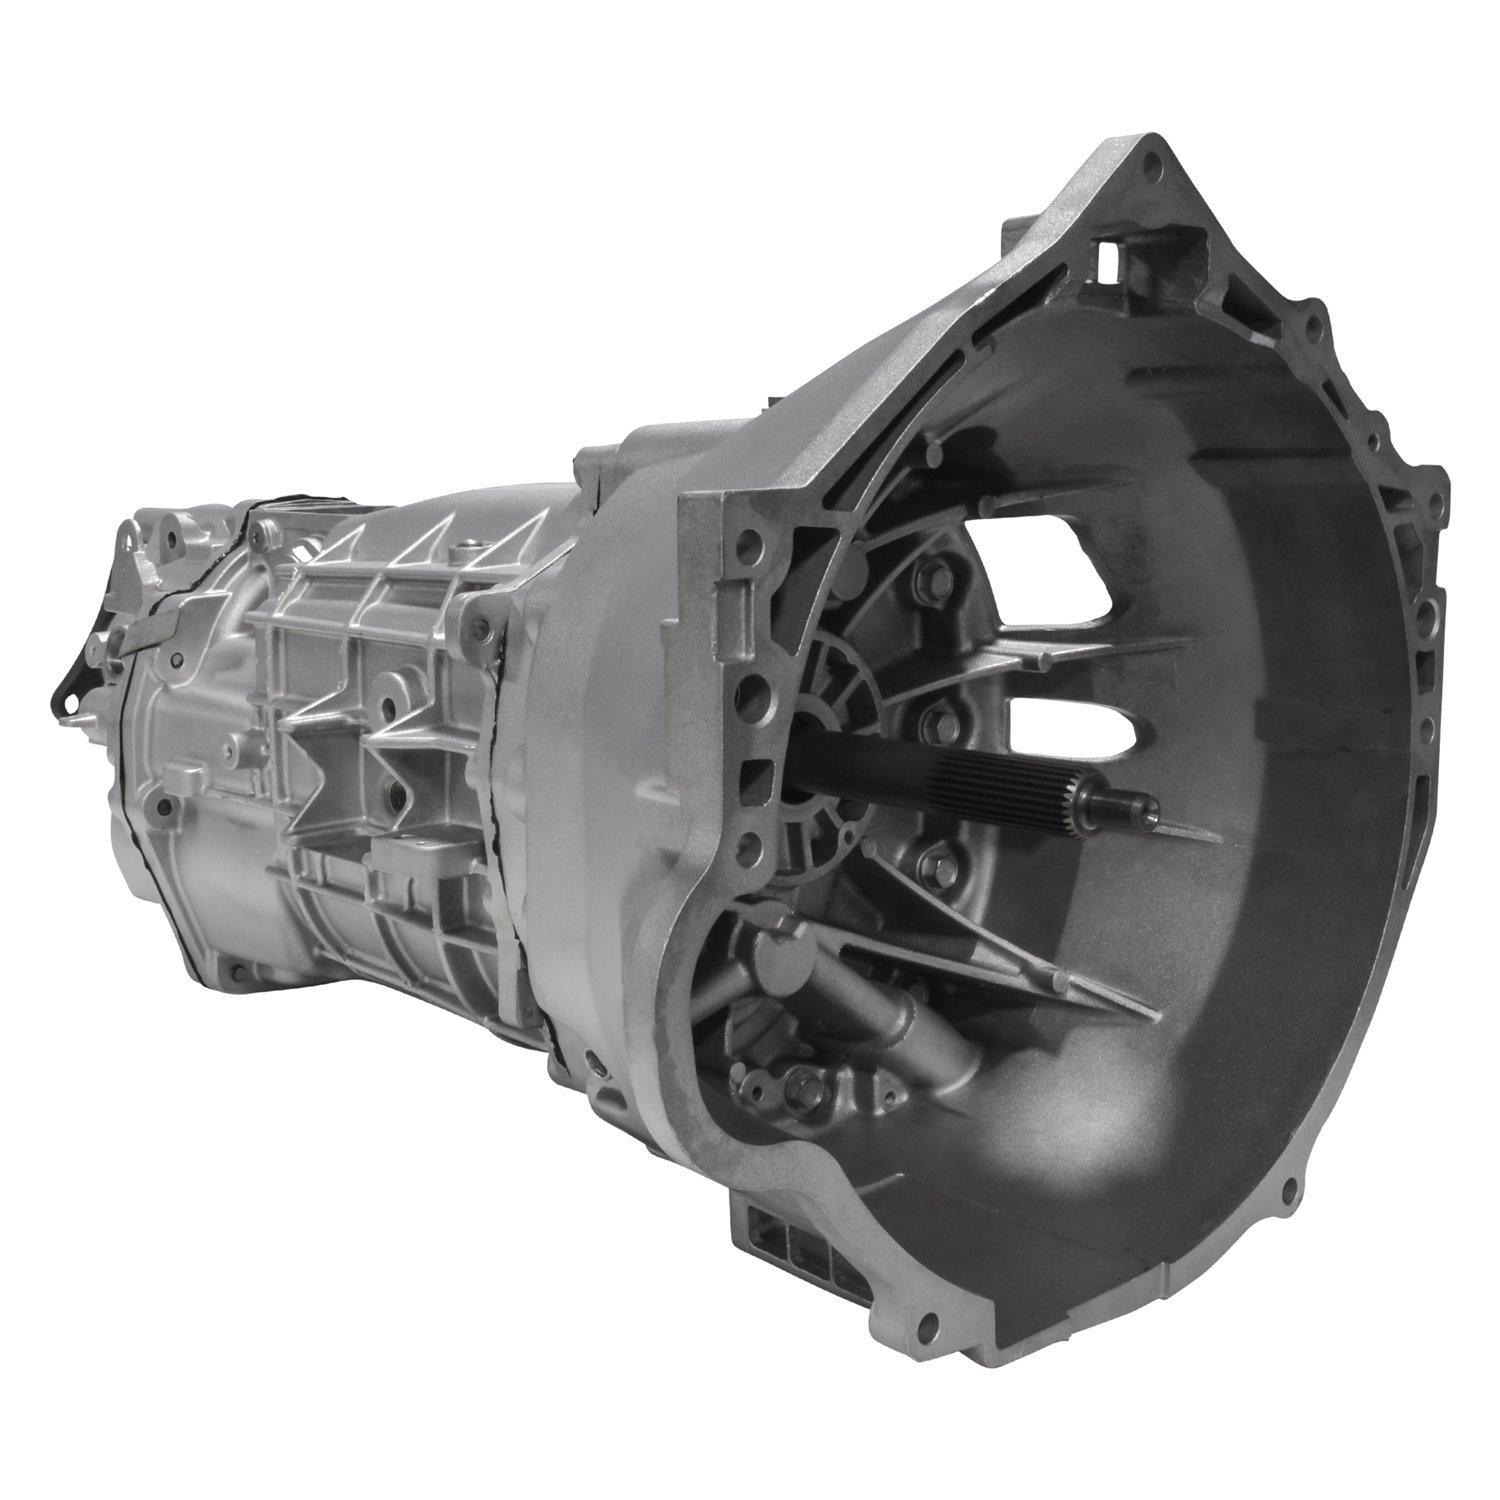 Remanufactured Manual Transmission for Chevy Camaro SS with